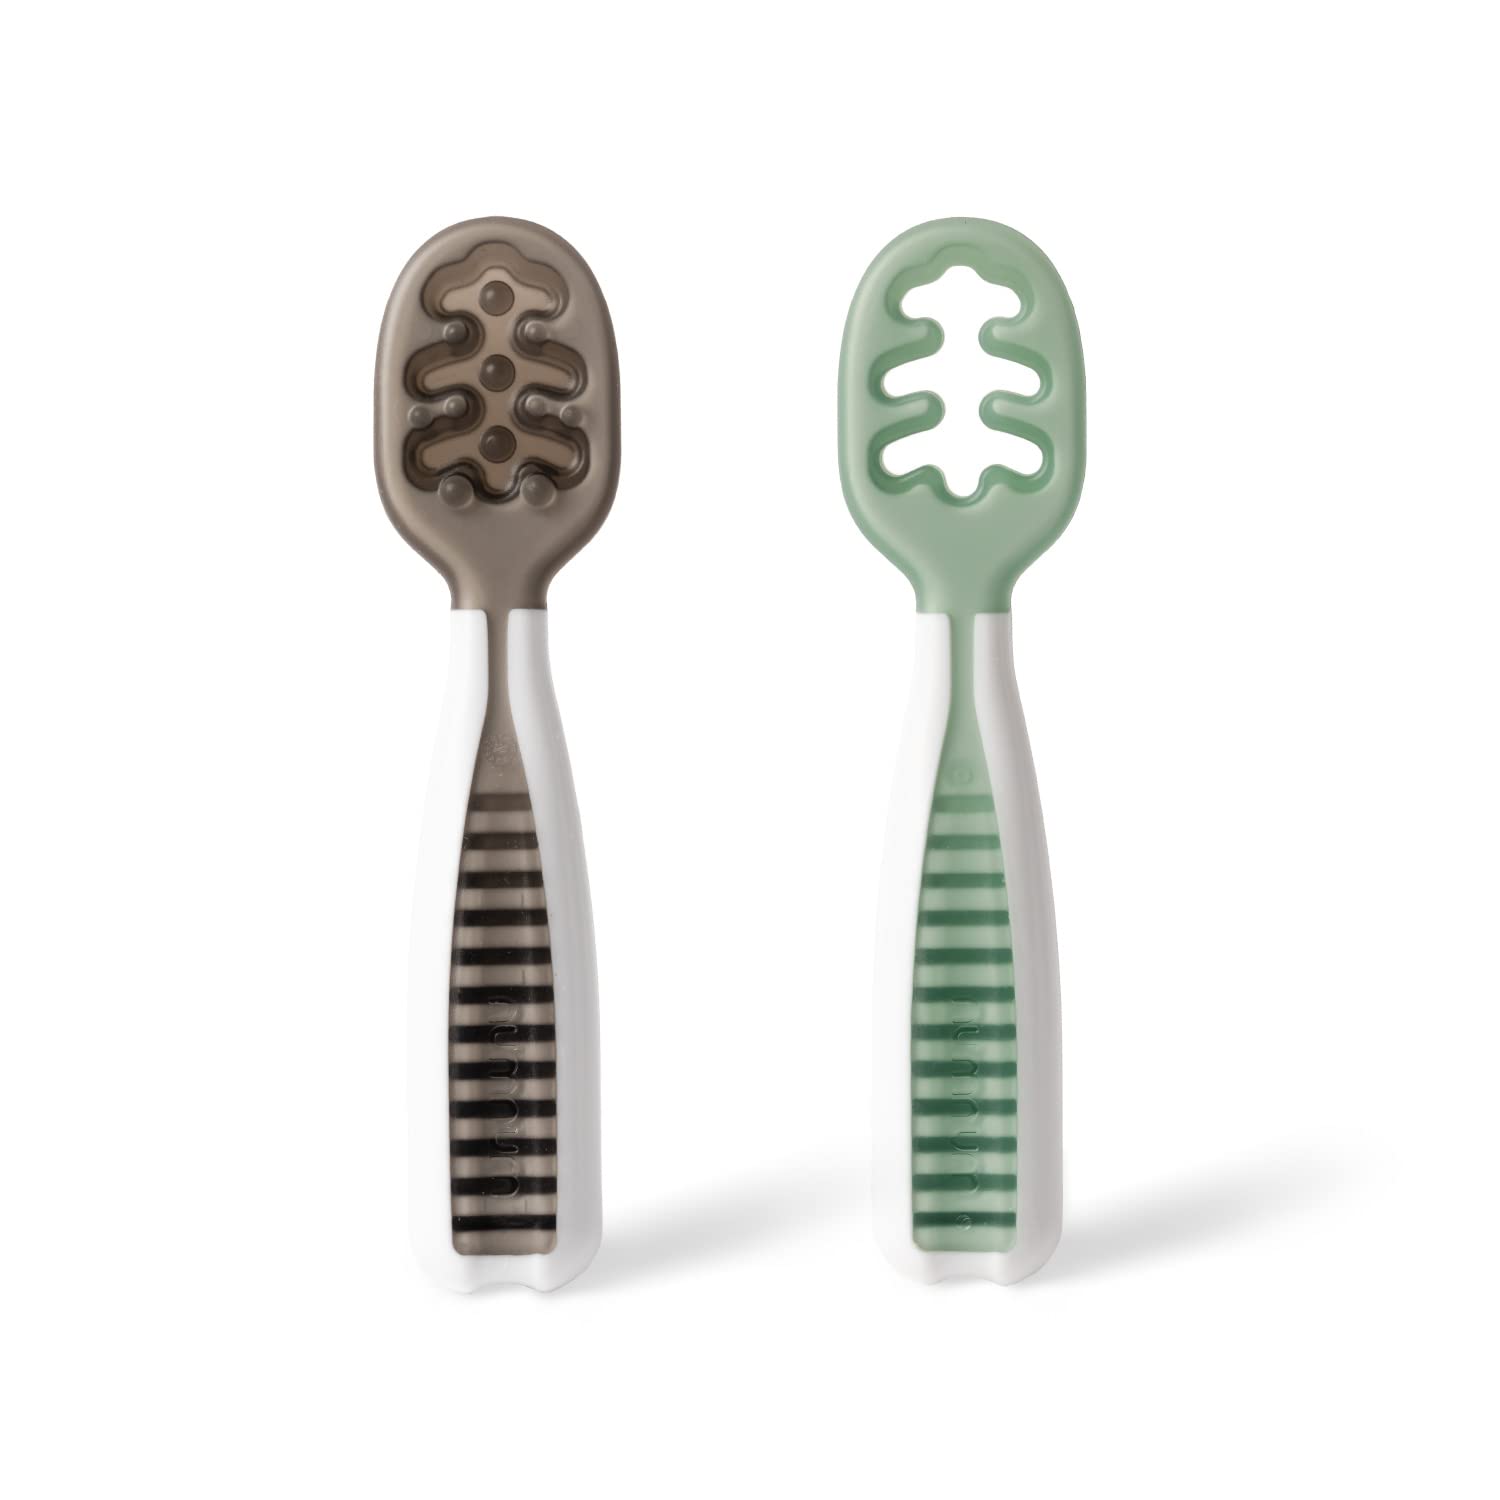 NumNum Pre-Spoon GOOtensils | Baby Spoon Set (STAGE One + Stage Two) | BPA